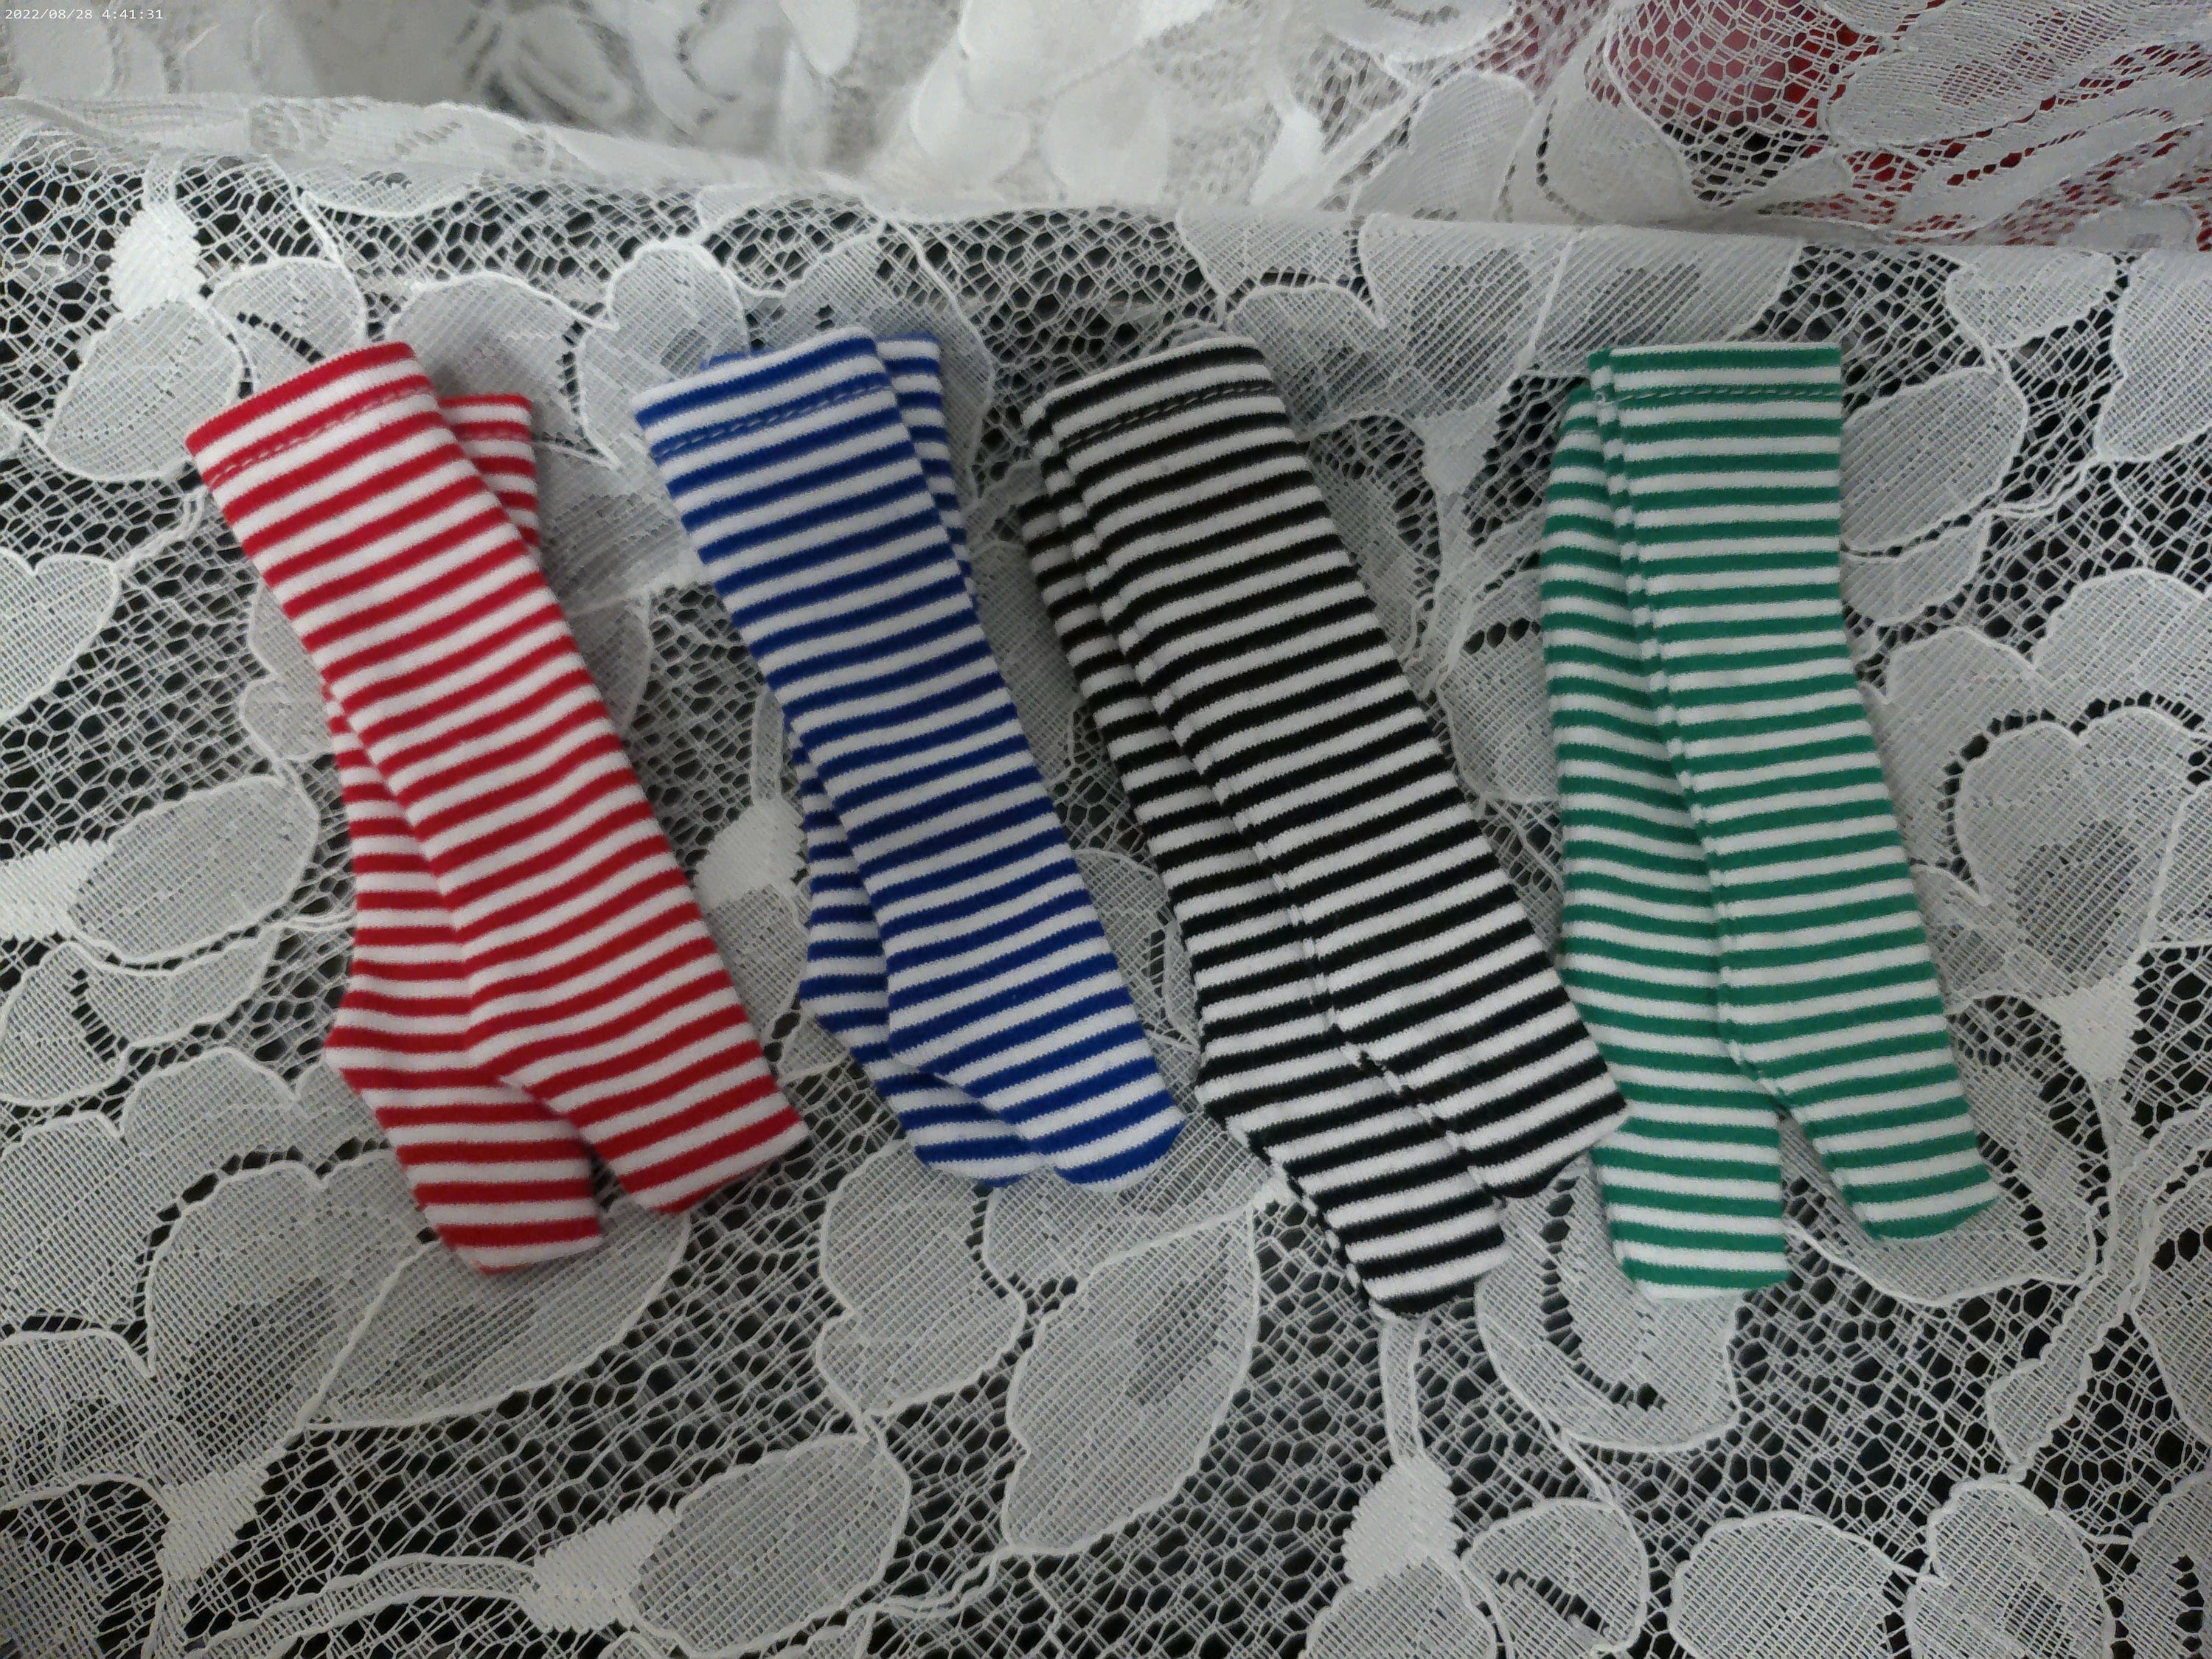 Raggedy Ann Red & White Striped Tights for Infant / Baby / Toddler Lil' Elf  Tights Bearington Bear - (6M-12M, 12M-24M, 2T-3T)